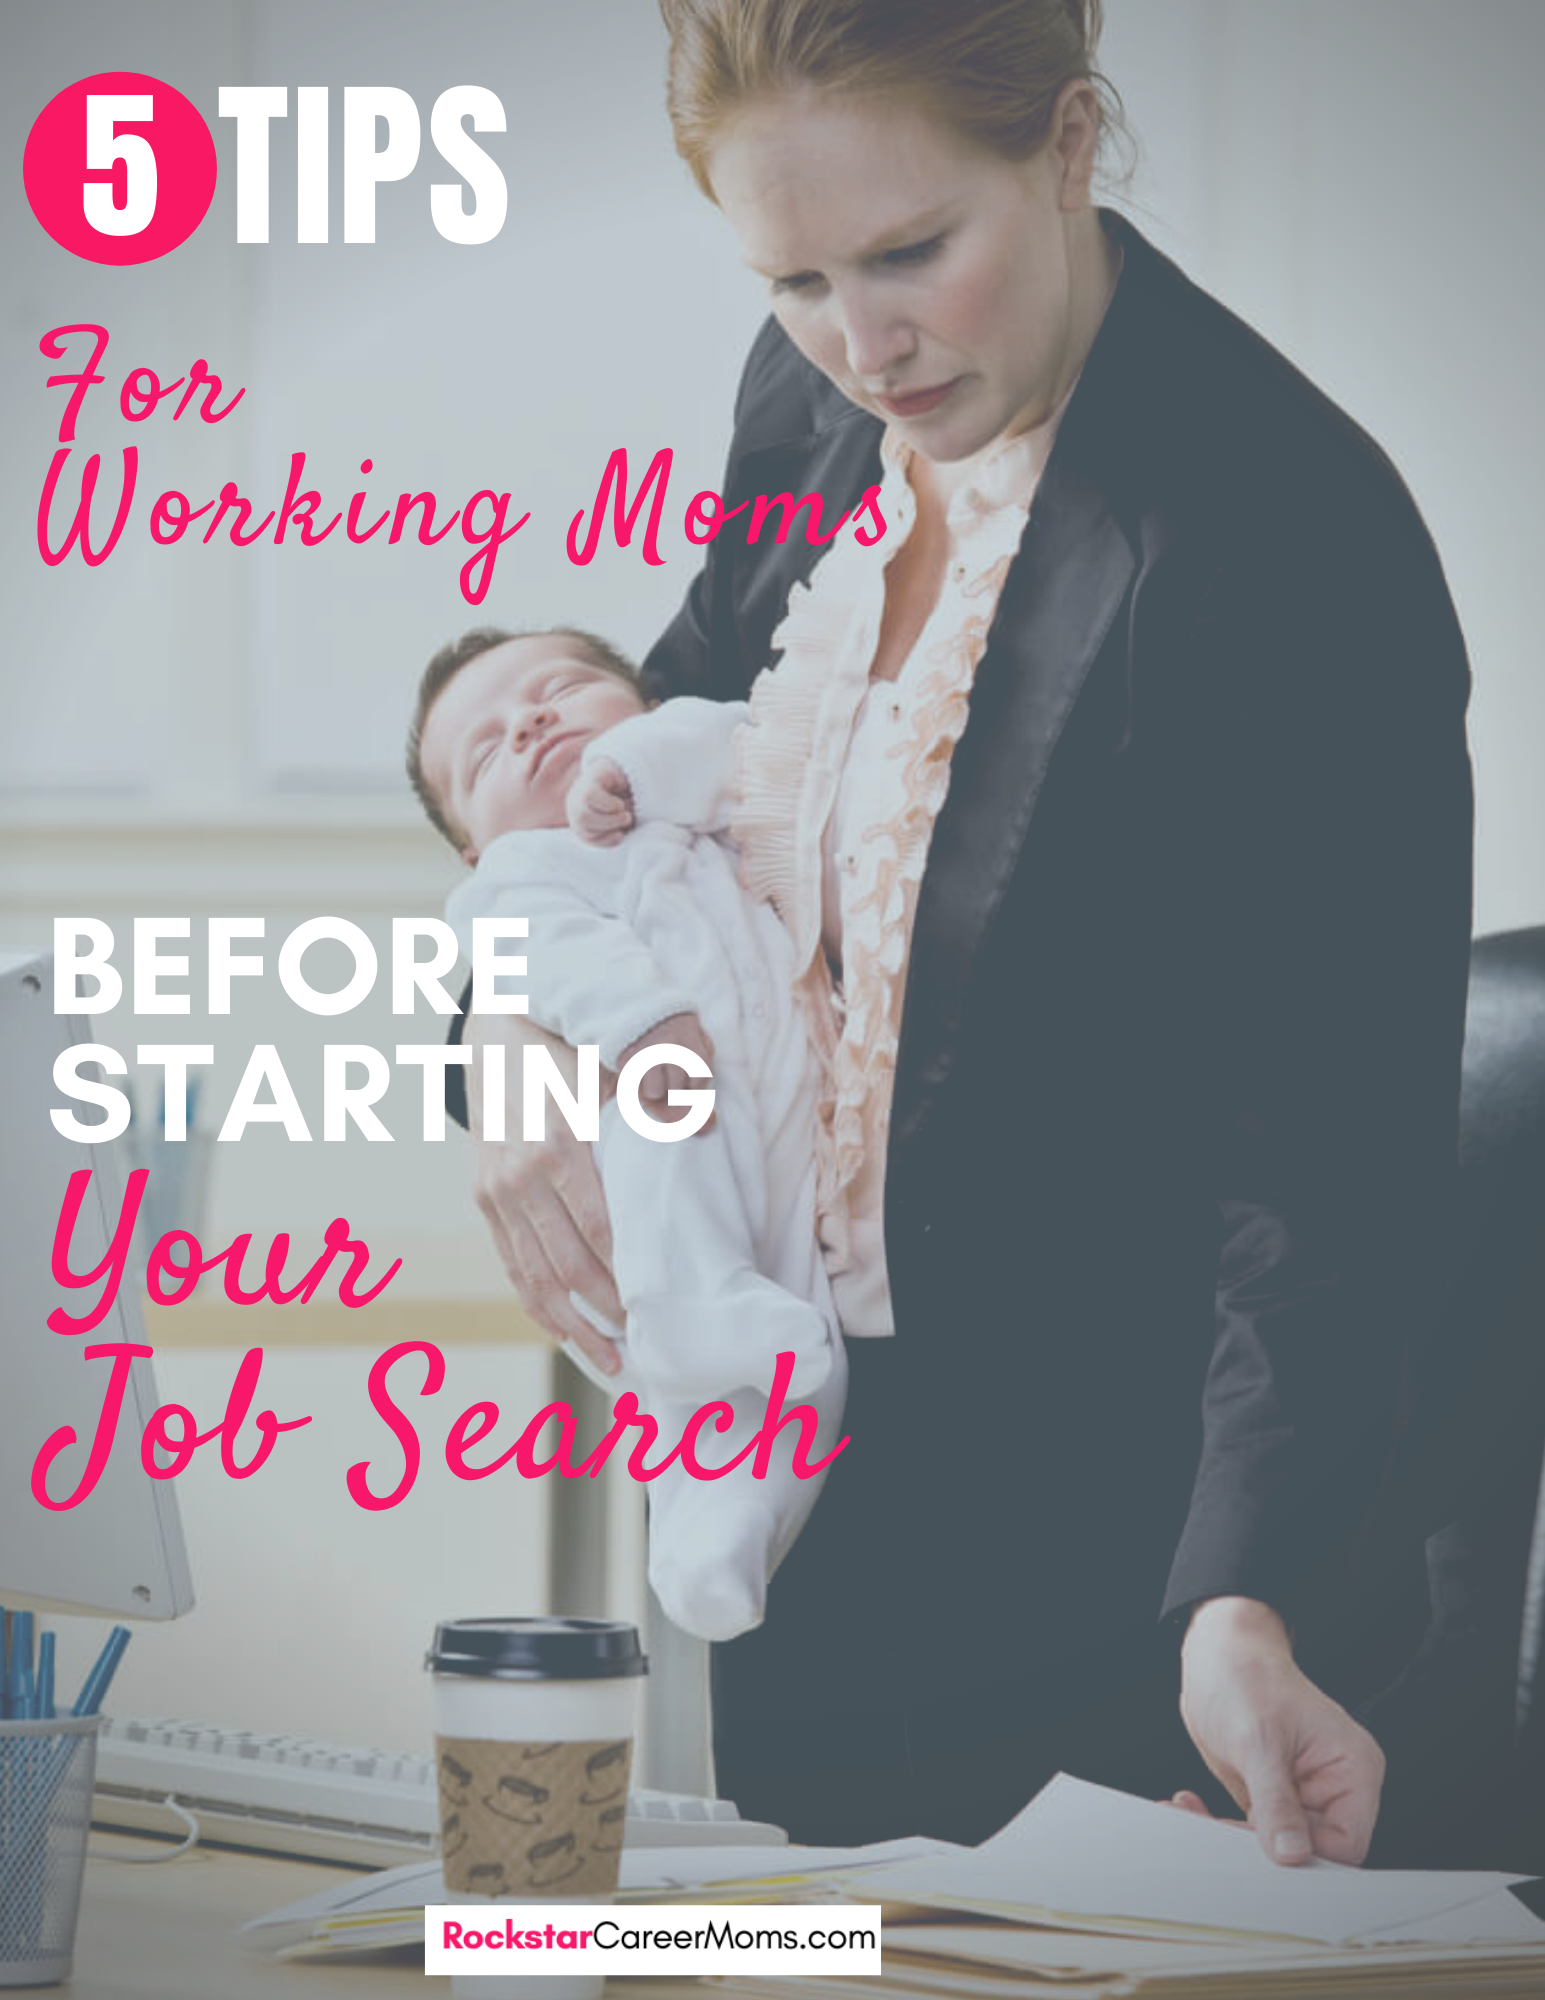 5 Musts For Moms Before Starting a Job Search